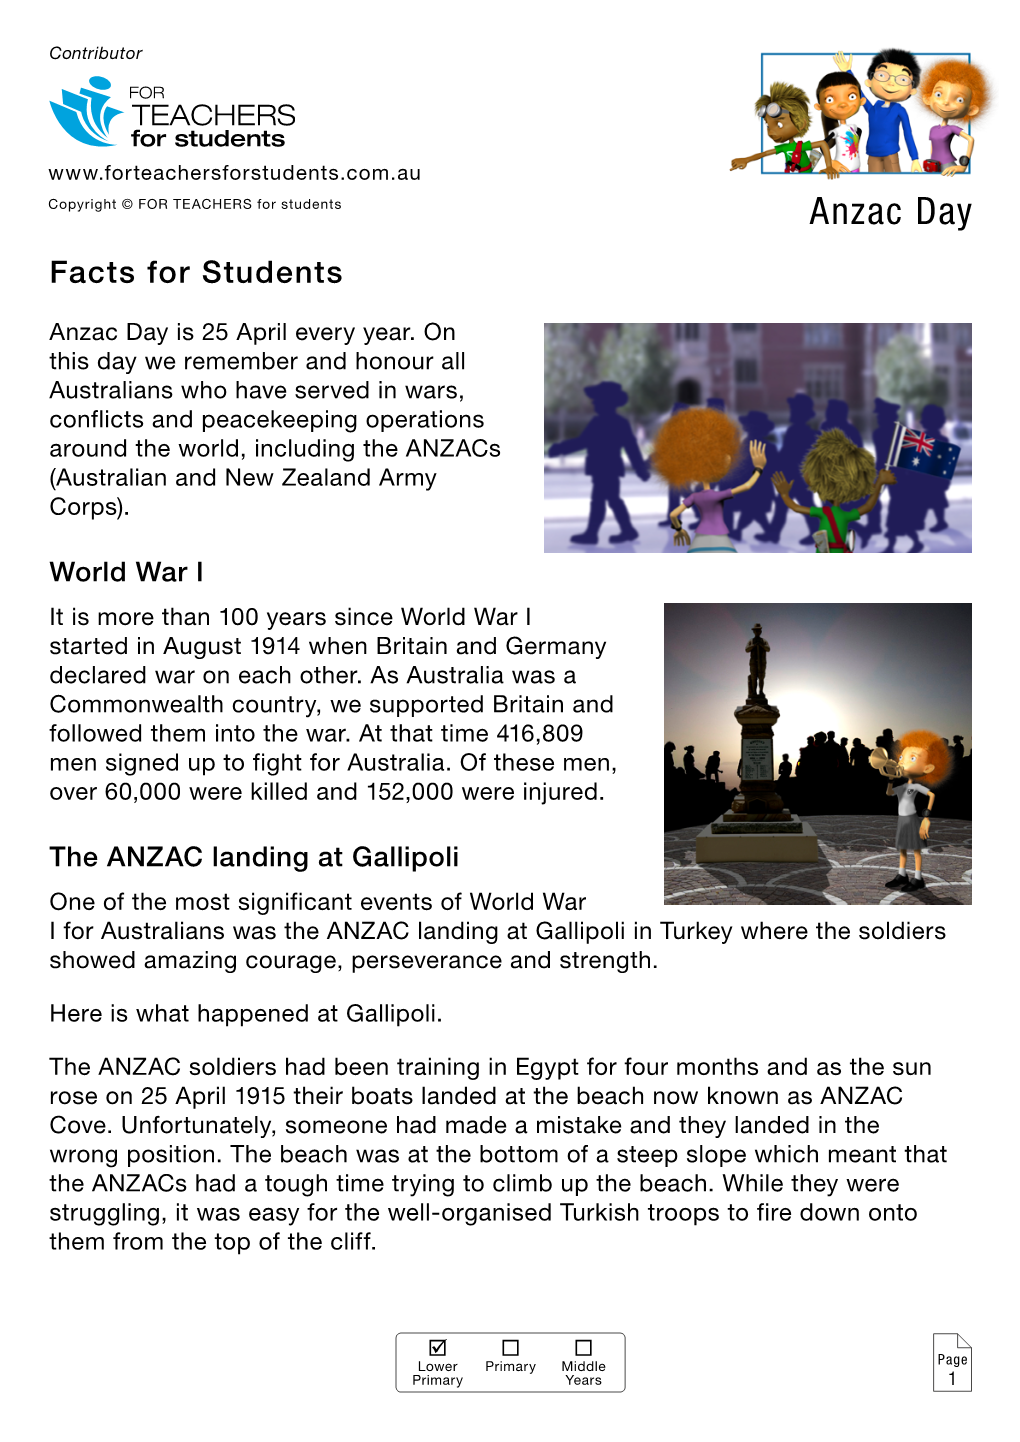 Anzac Day Facts for Students